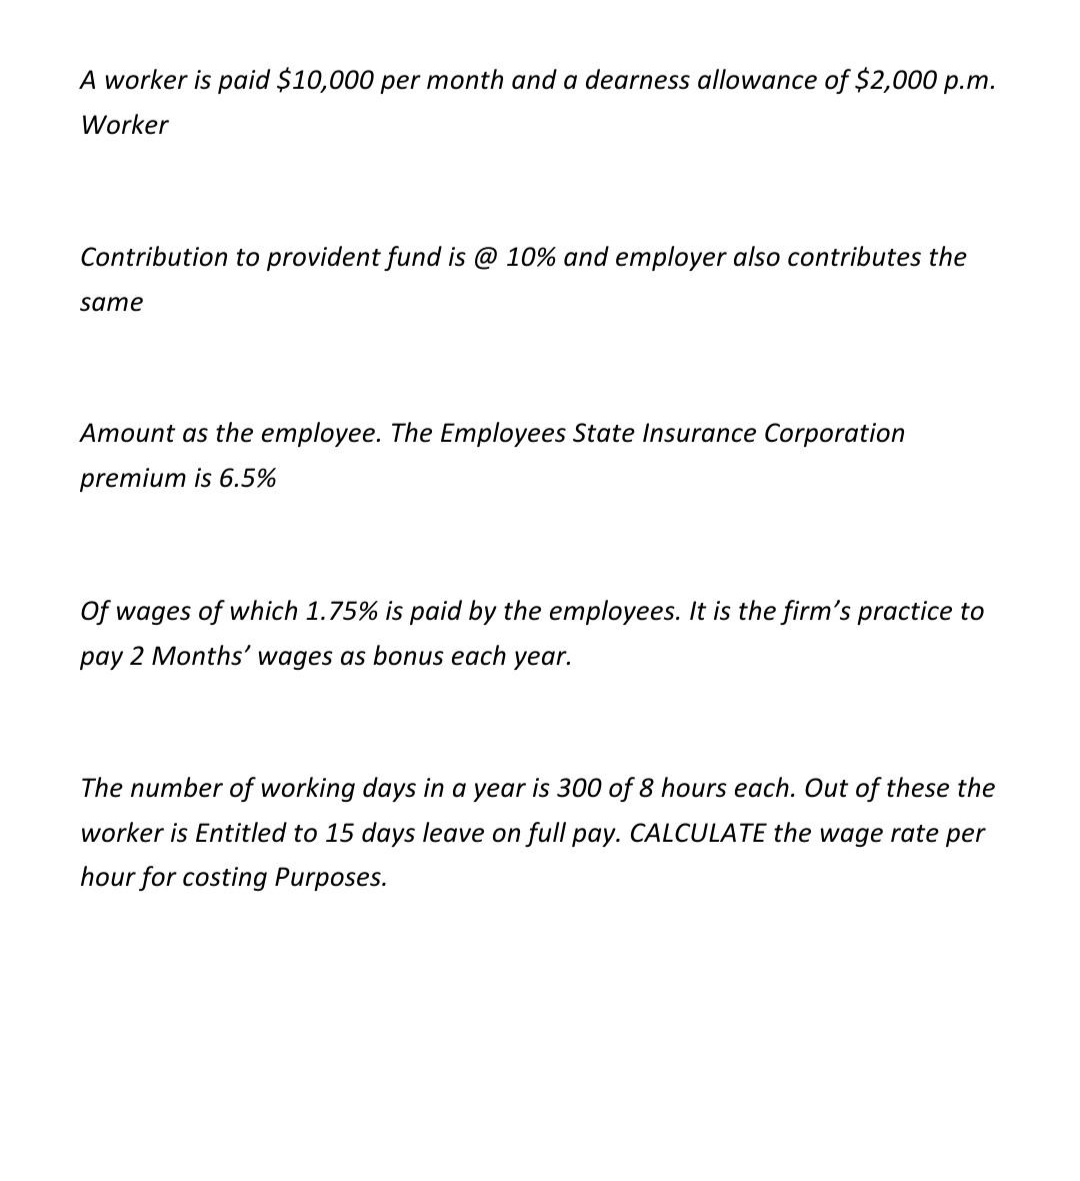 A worker is paid $10,000 per month and a dearness allowance of $2,000 p.m.
Worker
Contribution to provident fund is @ 10% and employer also contributes the
same
Amount as the employee. The Employees State Insurance Corporation
premium is 6.5%
Of wages of which 1.75% is paid by the employees. It is the firm's practice to
pay 2 Months' wages as bonus each year.
The number of working days in a year is 300 of 8 hours each. Out of these the
worker is Entitled to 15 days leave on full pay. CALCULATE the wage rate per
hour for costing Purposes.
